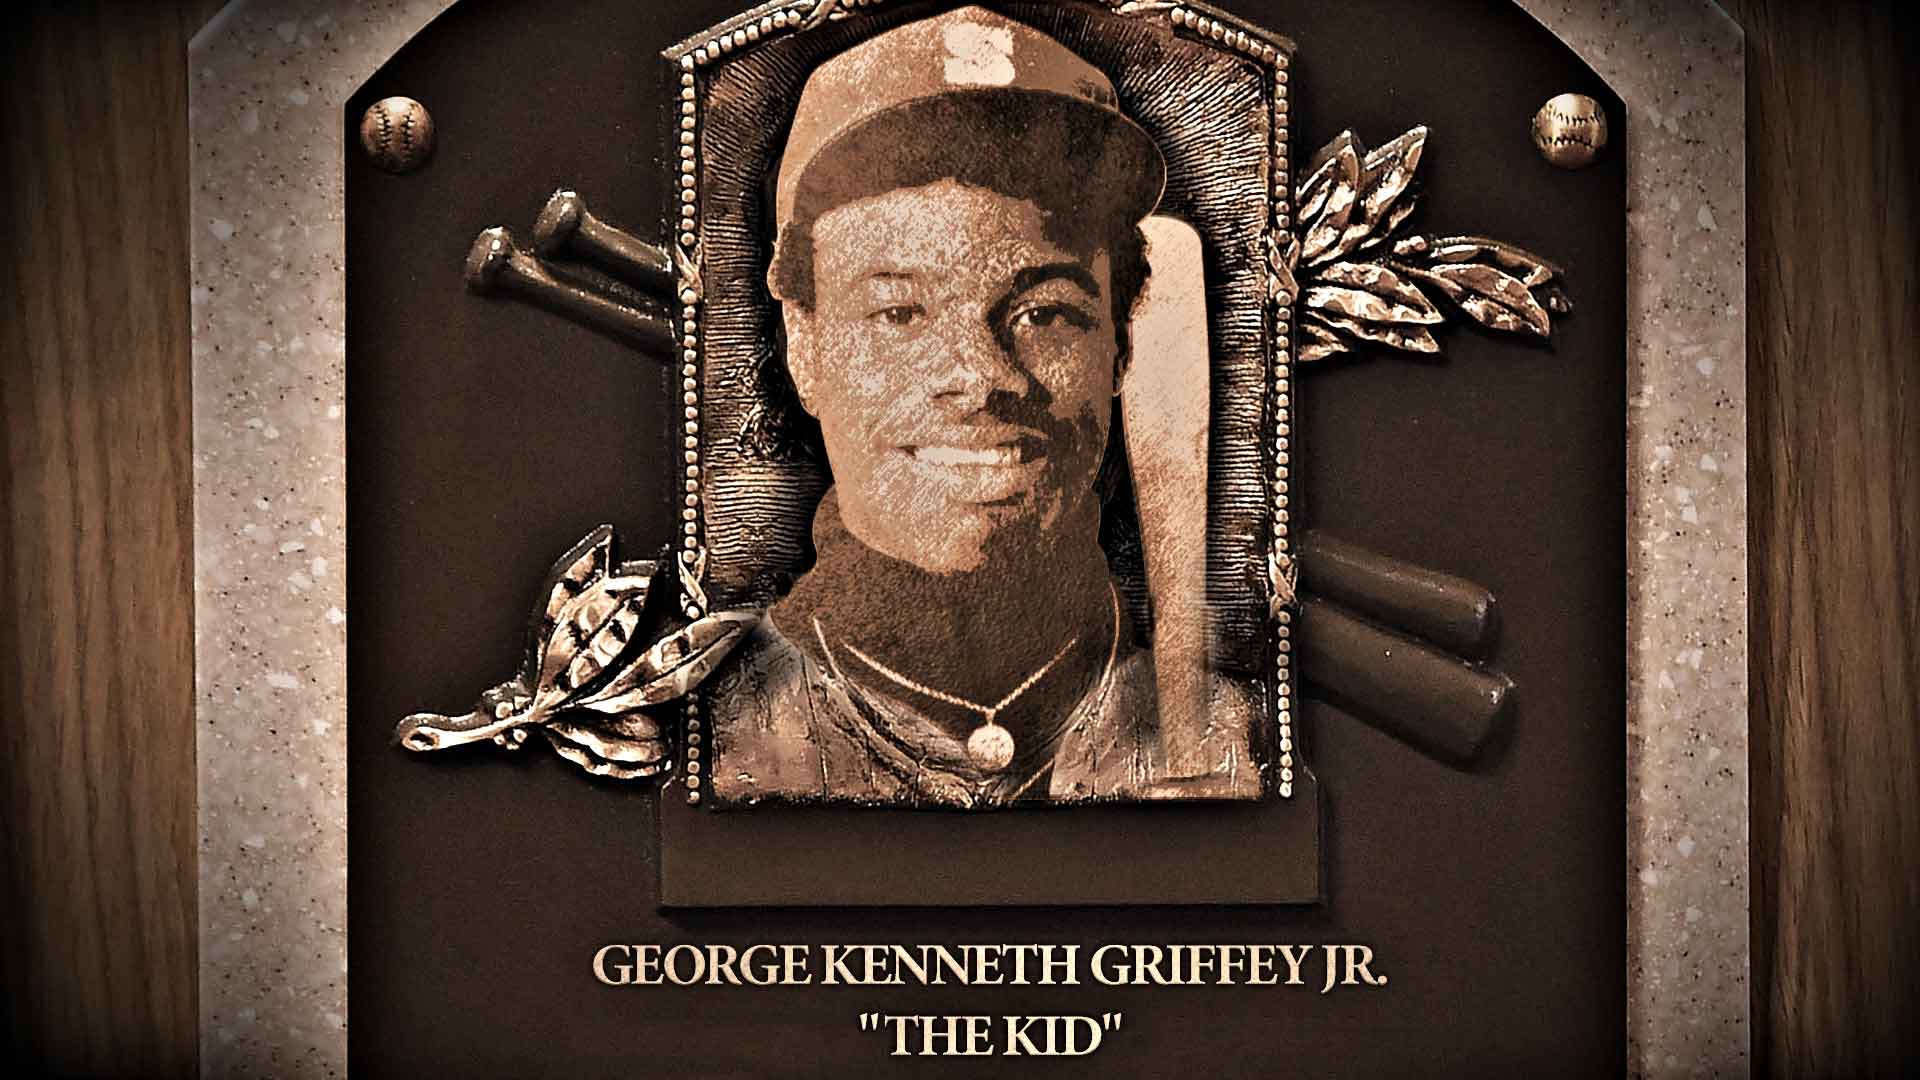 Here's what Ken Griffey Jr.'s Hall of Fame plaque should